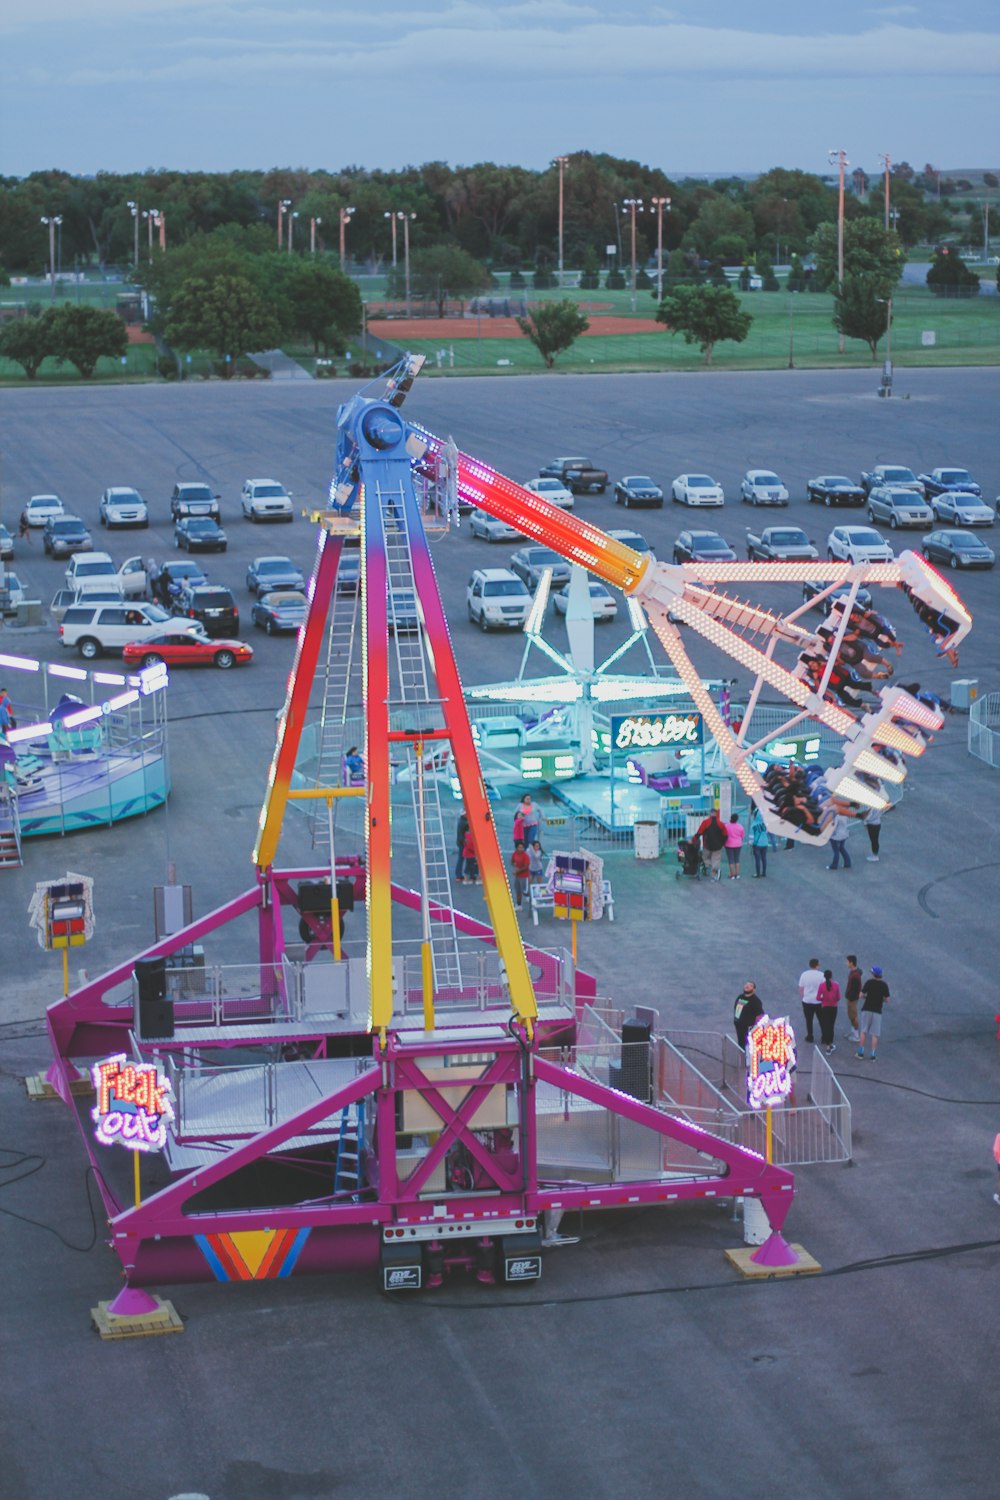 a carnival ride in a parking lot